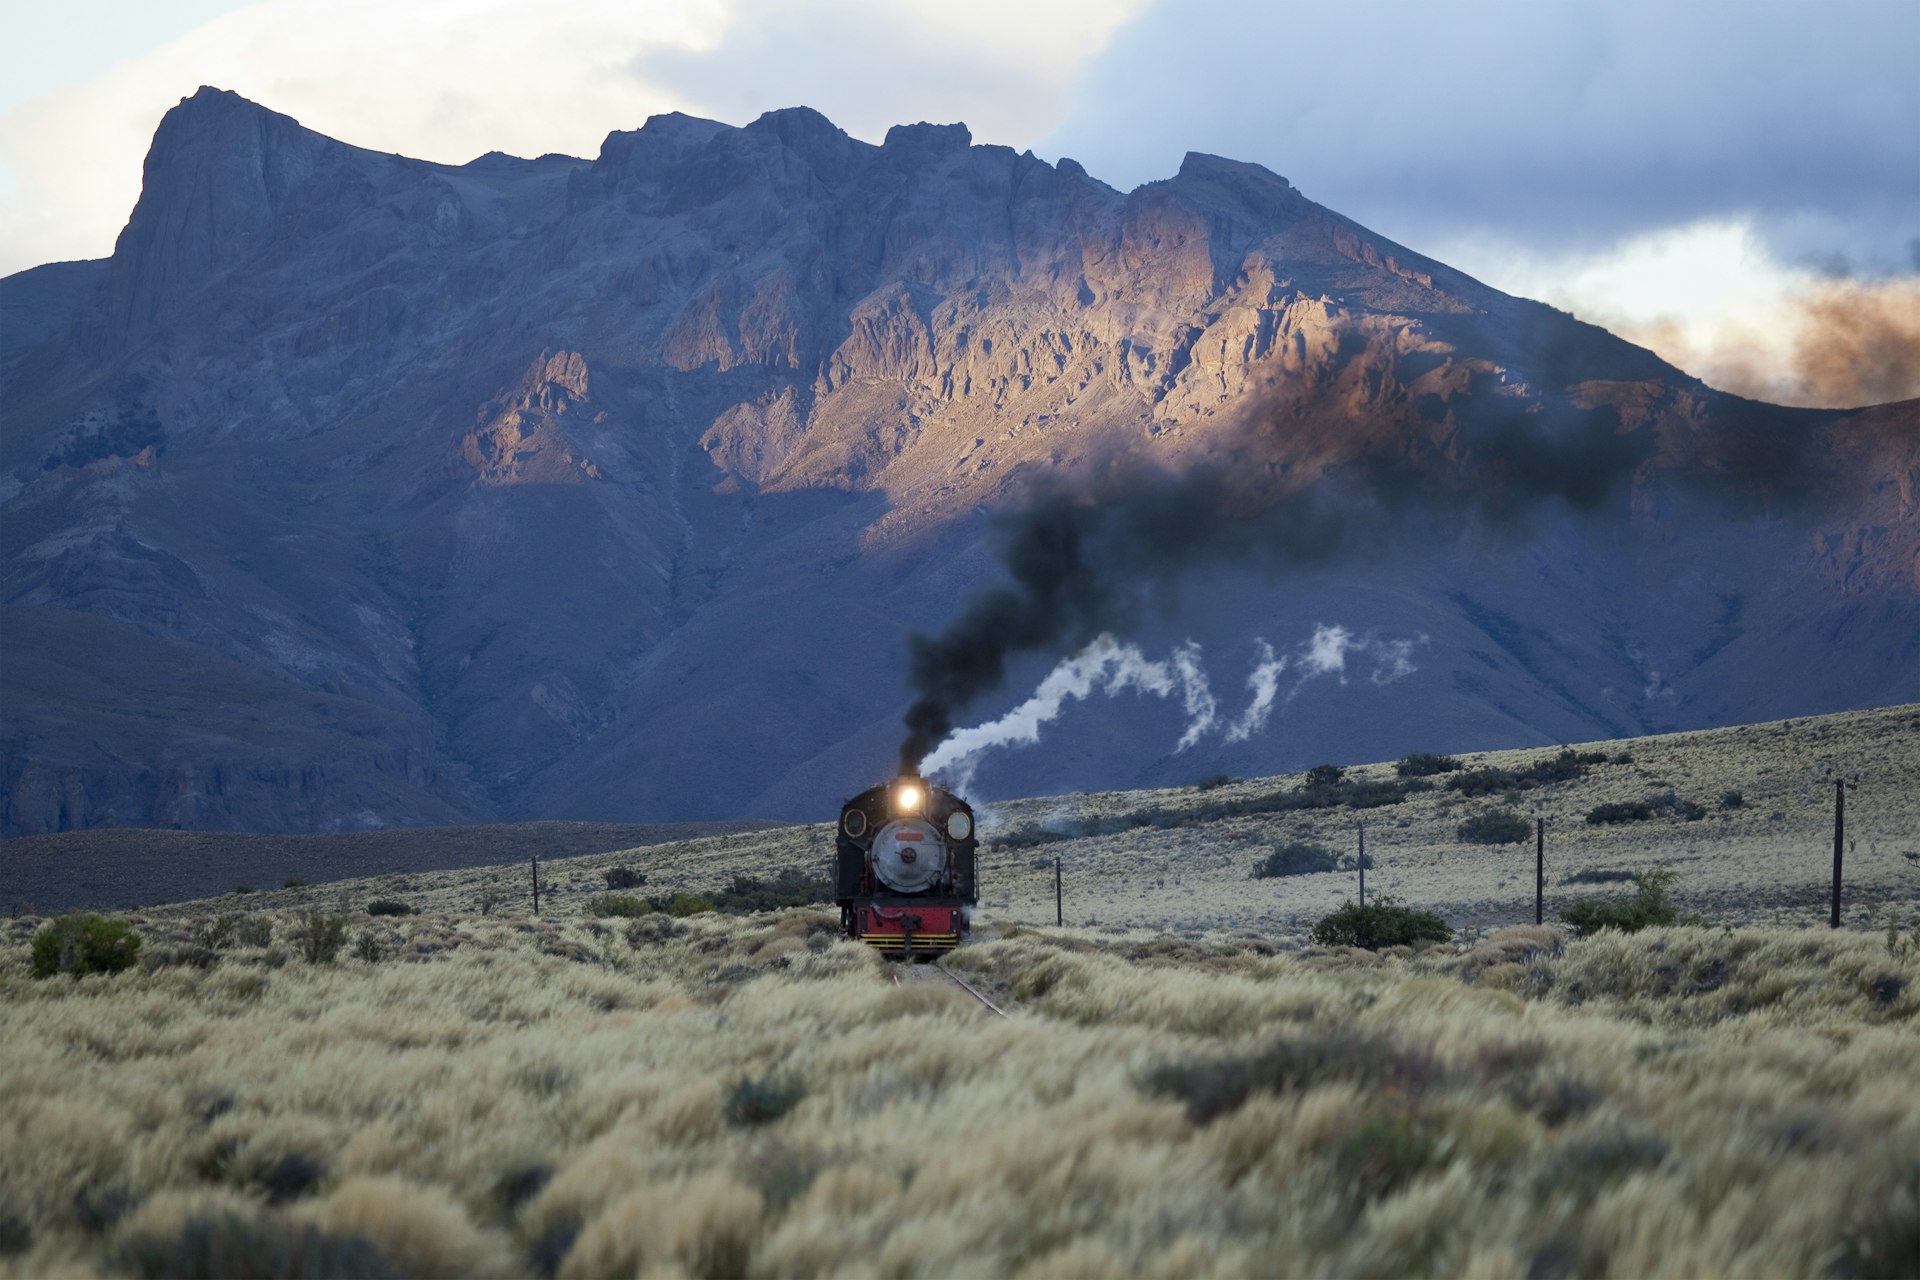 An old steam train traveling through the Patagonian landscape with grass in the foreground and mountain peaks behind.